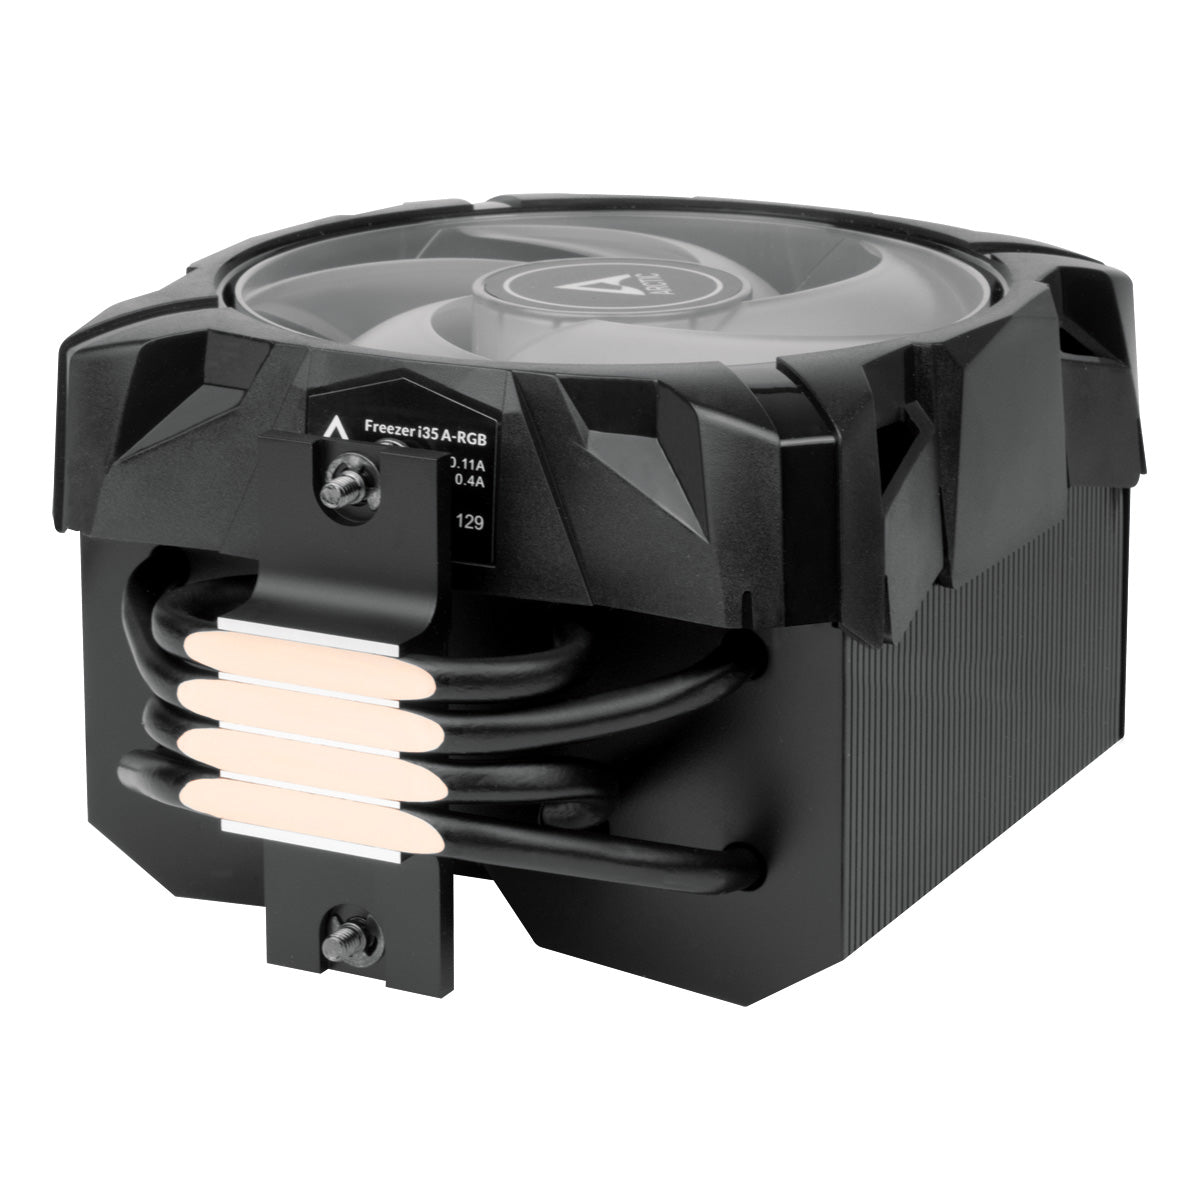 Arctic Freezer A35 A-RGB - Single Tower CPU Cooler with A-RGB, AMD Specific, Pressure Optimized 120 mm P-Fan, 200-1700 RPM, 4 Heat Pipes, incl. MX-5 Thermal Paste (ACFRE00115A)